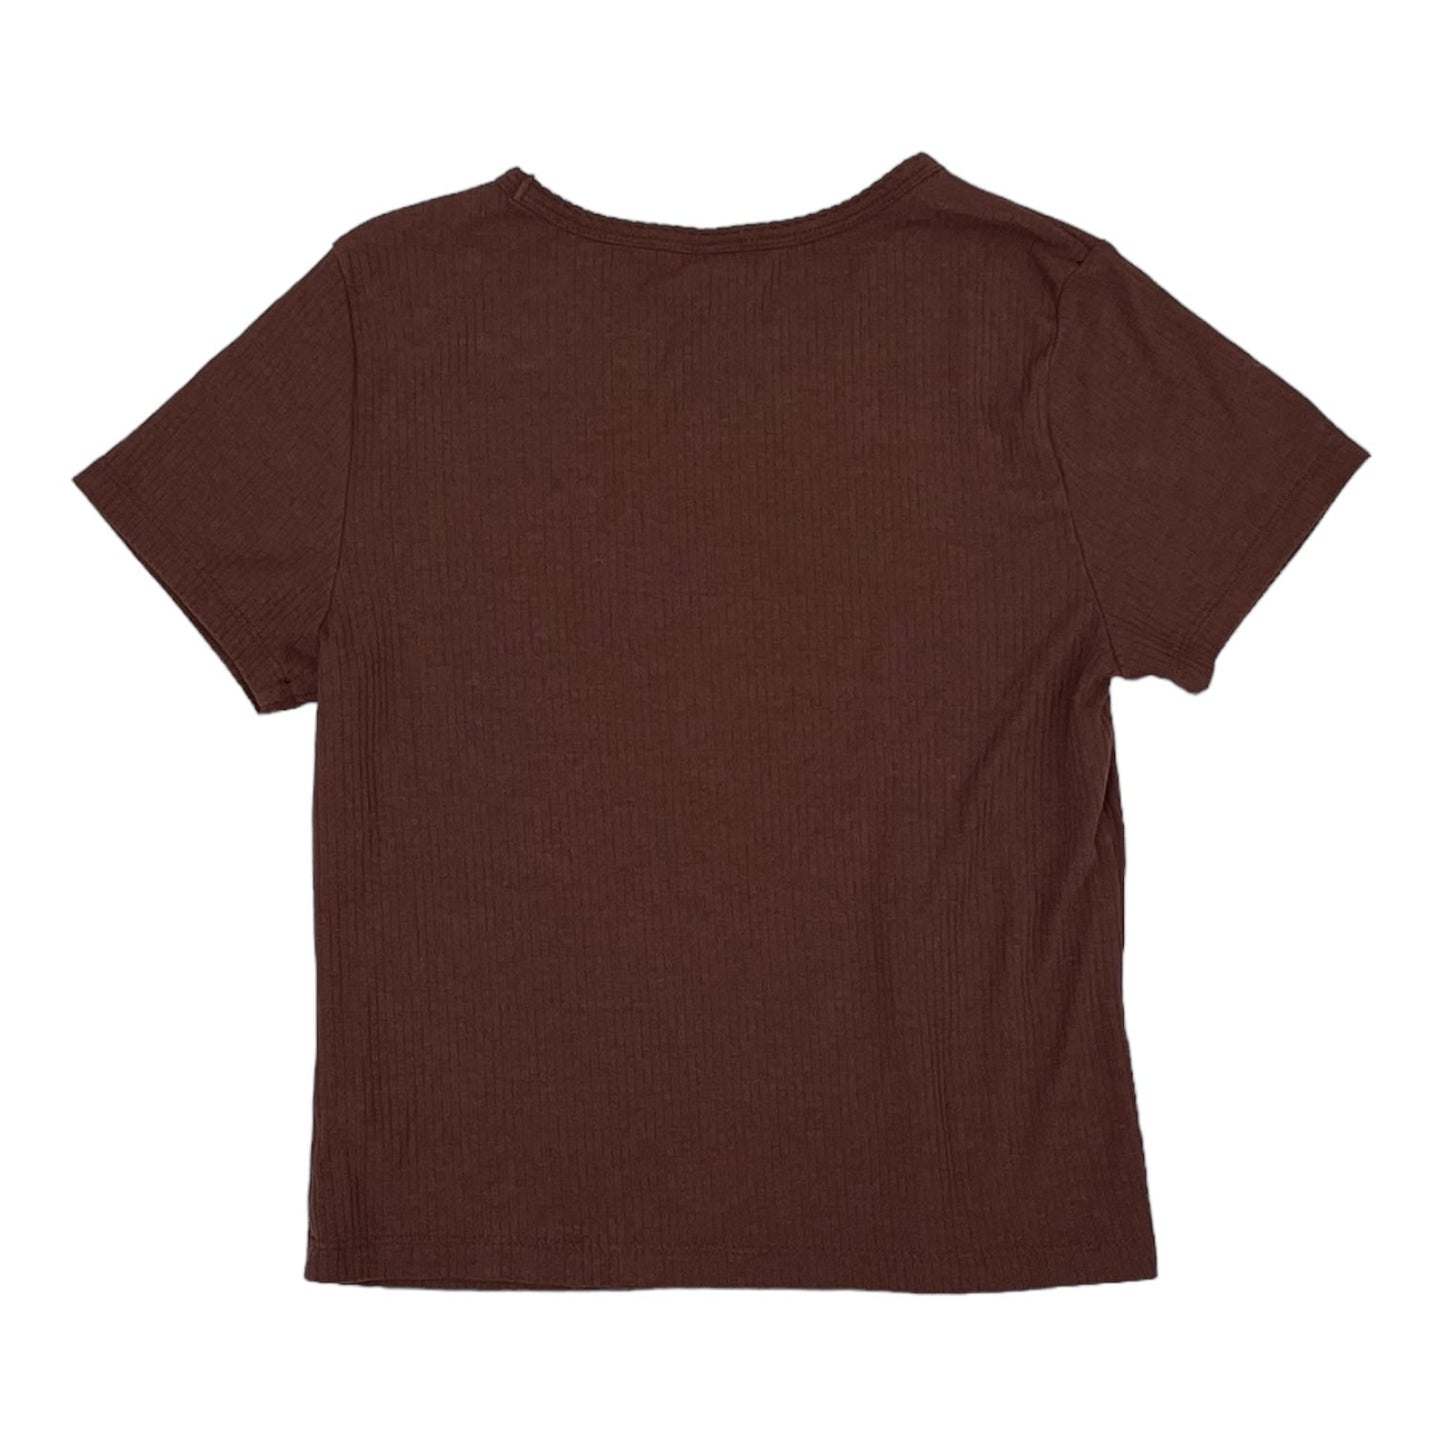 BROWN TOP SS by OLD NAVY Size:M